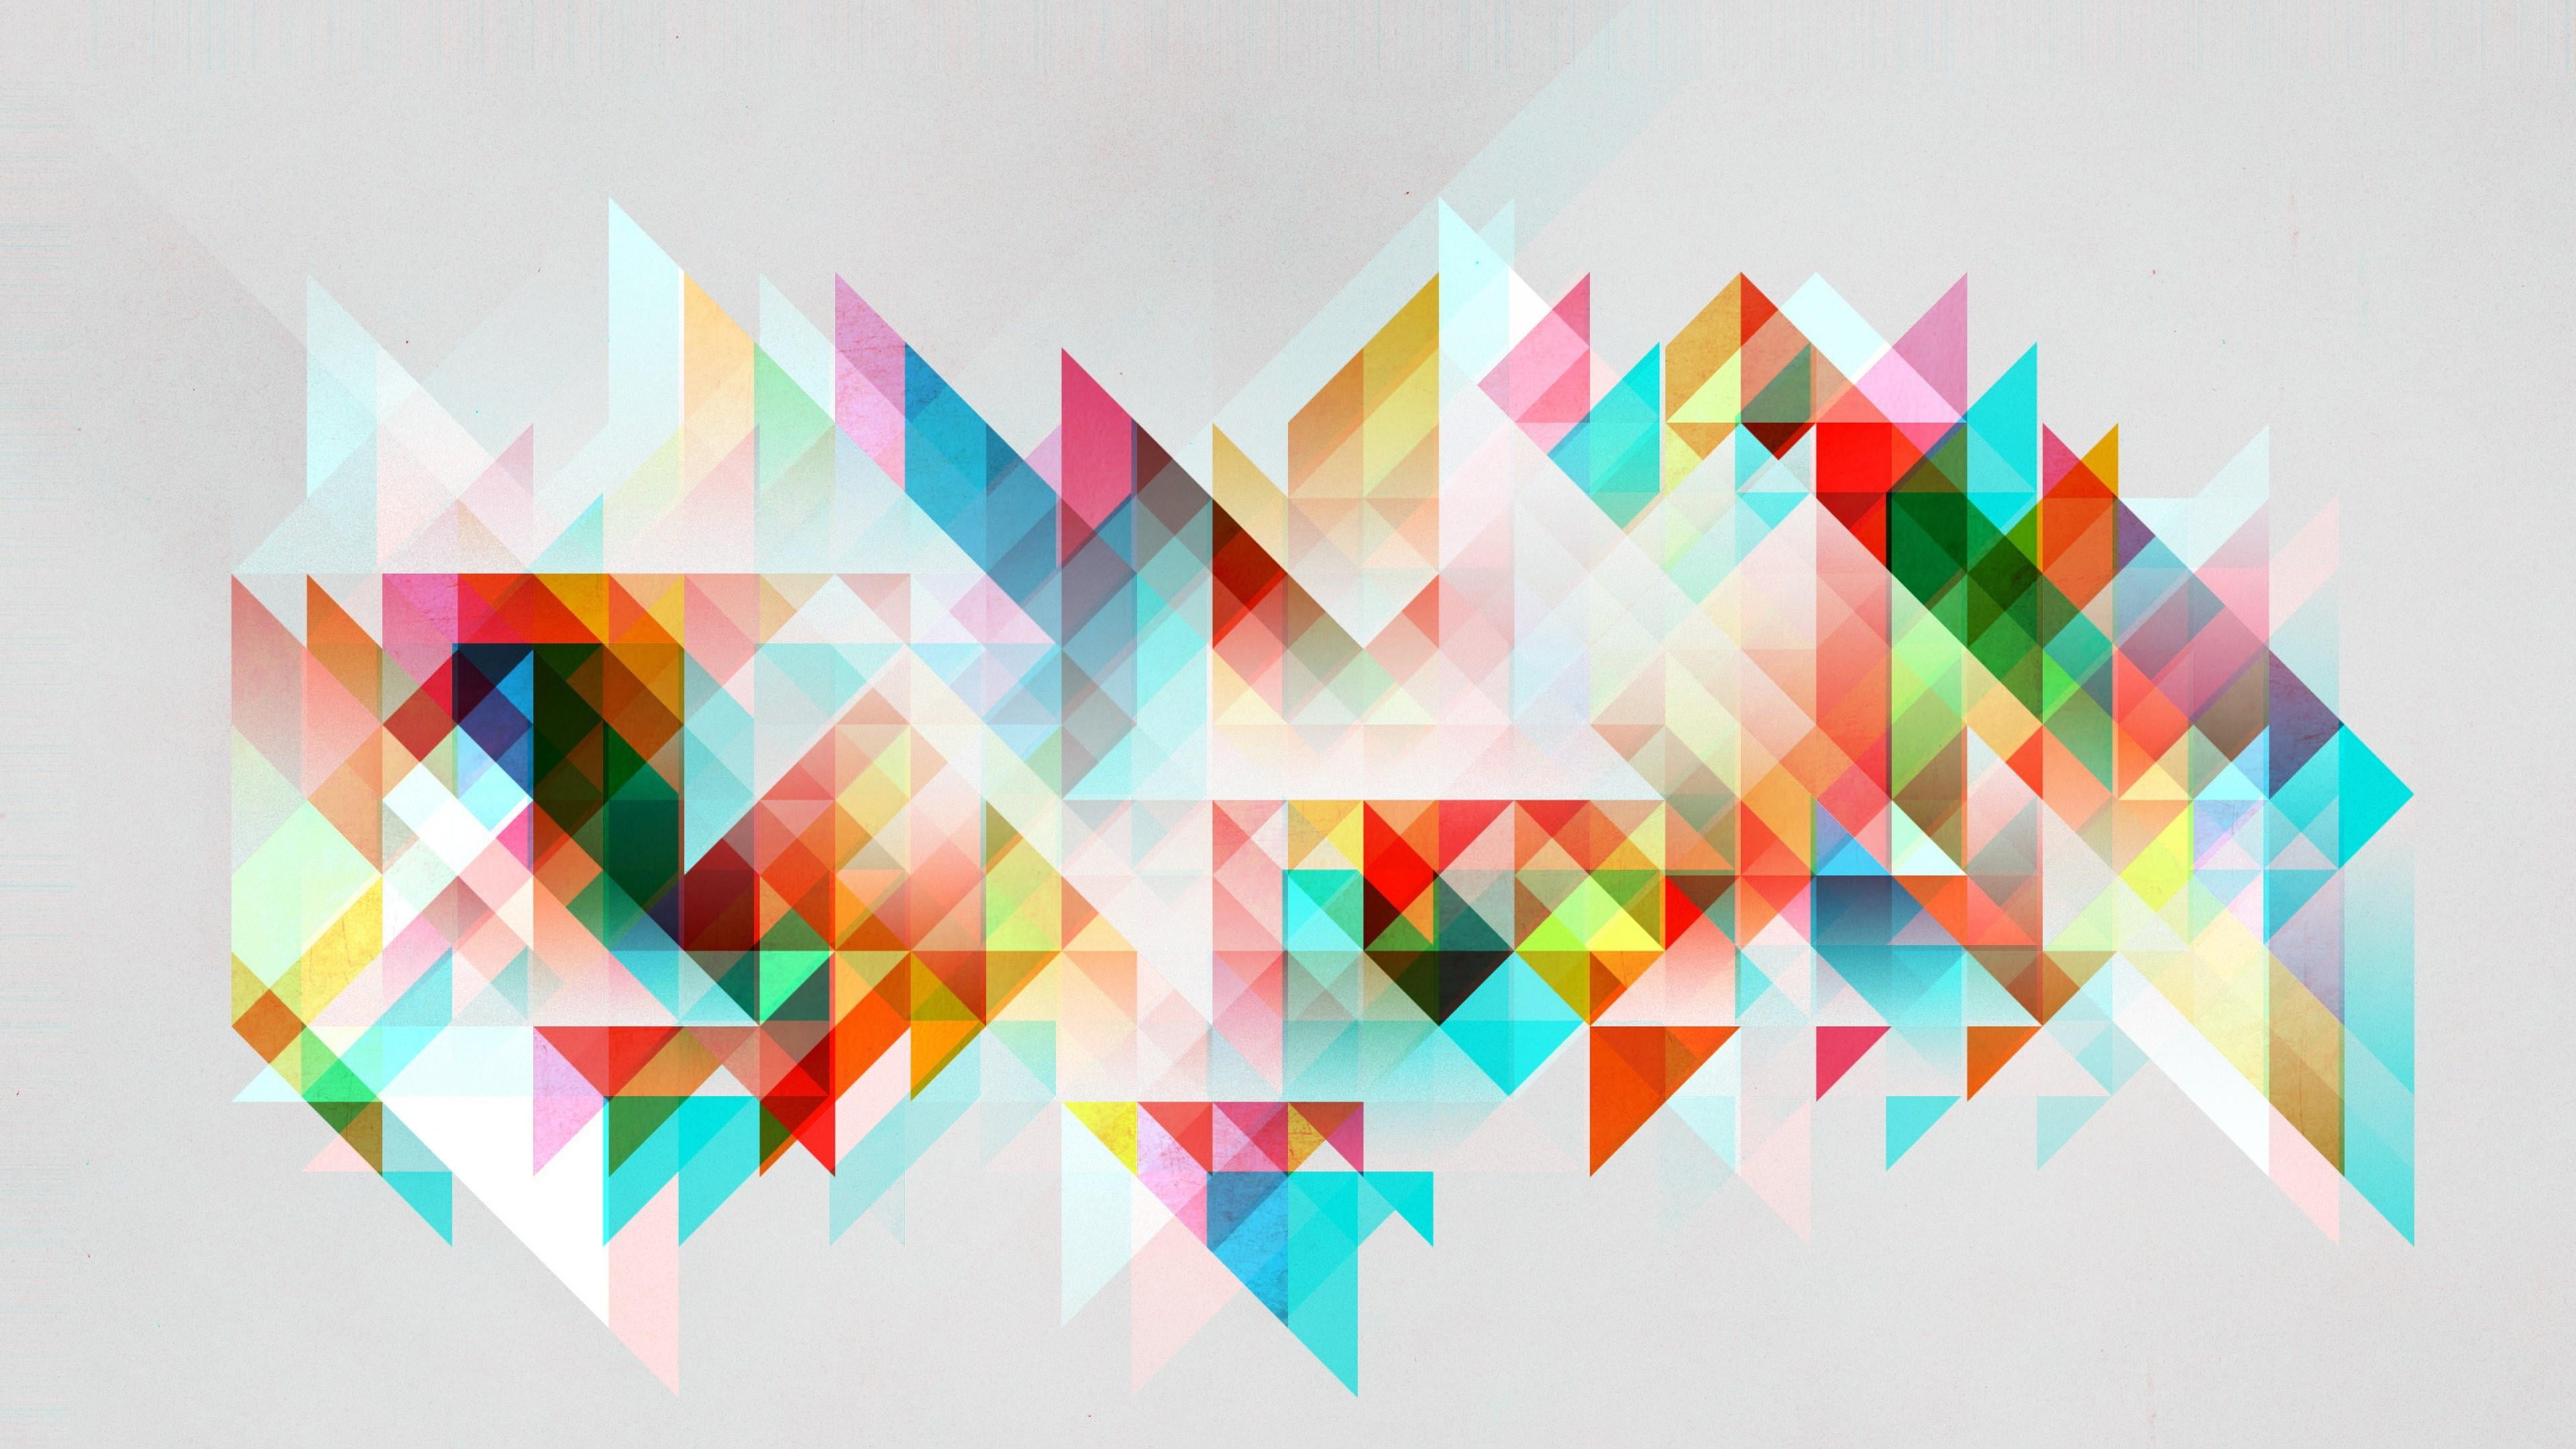 3d, geometry, abstraction, colorful, shapes, triangle, symmetry